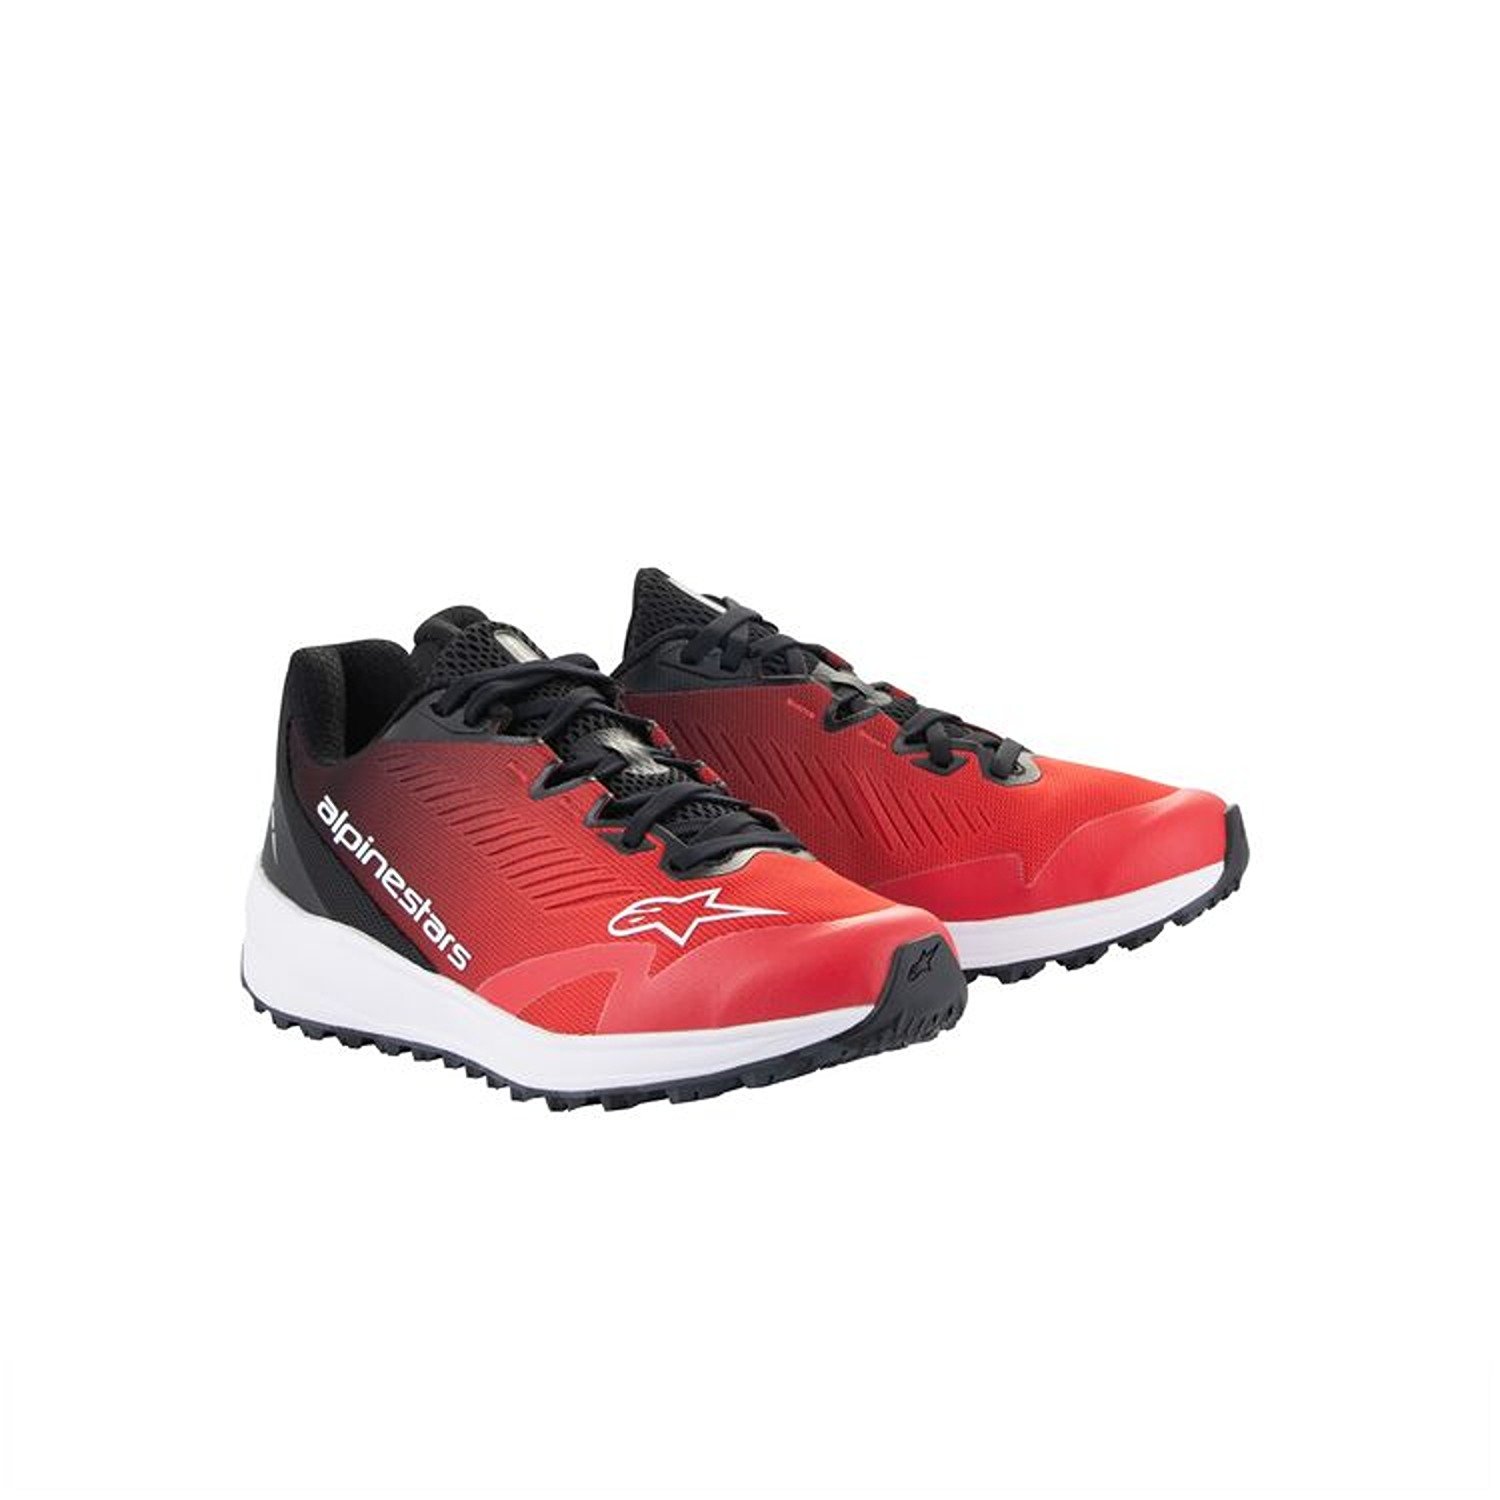 Image of Alpinestars Meta Road V2 Shoes Red Black White Taille US 45